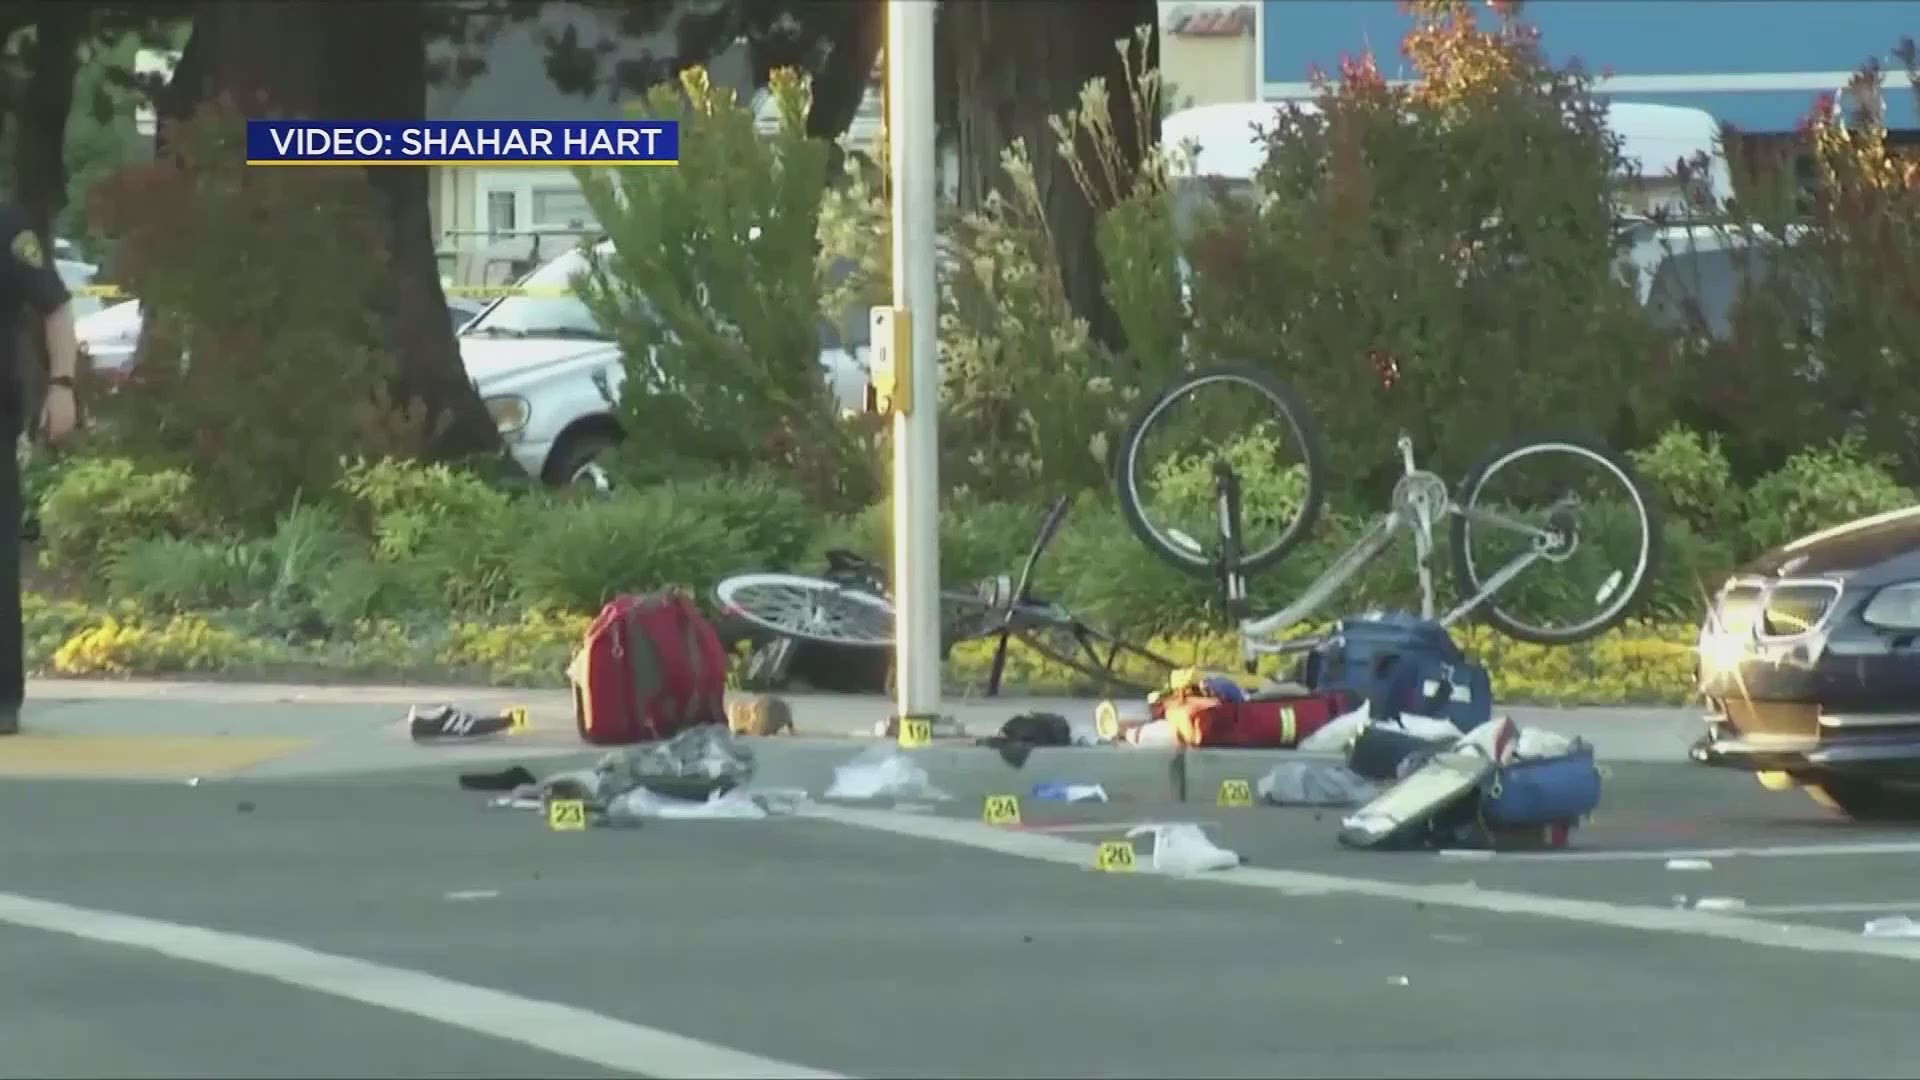 A former Army sharpshooter with a history of post-traumatic stress disorder plowed his car at high speed into a group of pedestrians in a Silicon Valley suburb, injuring eight people, then told authorities that he intentionally hit them, police said.

Isaiah Joel Peoples, 34, gave no indication why he targeted the group in Sunnyvale, California, authorities said. He was charged Thursday with eight counts of attempted murder. Four of the pedestrians remained hospitalized, including a 13-year-old girl who was in critical condition. Peoples was jailed without bond and scheduled to appear in court Friday.